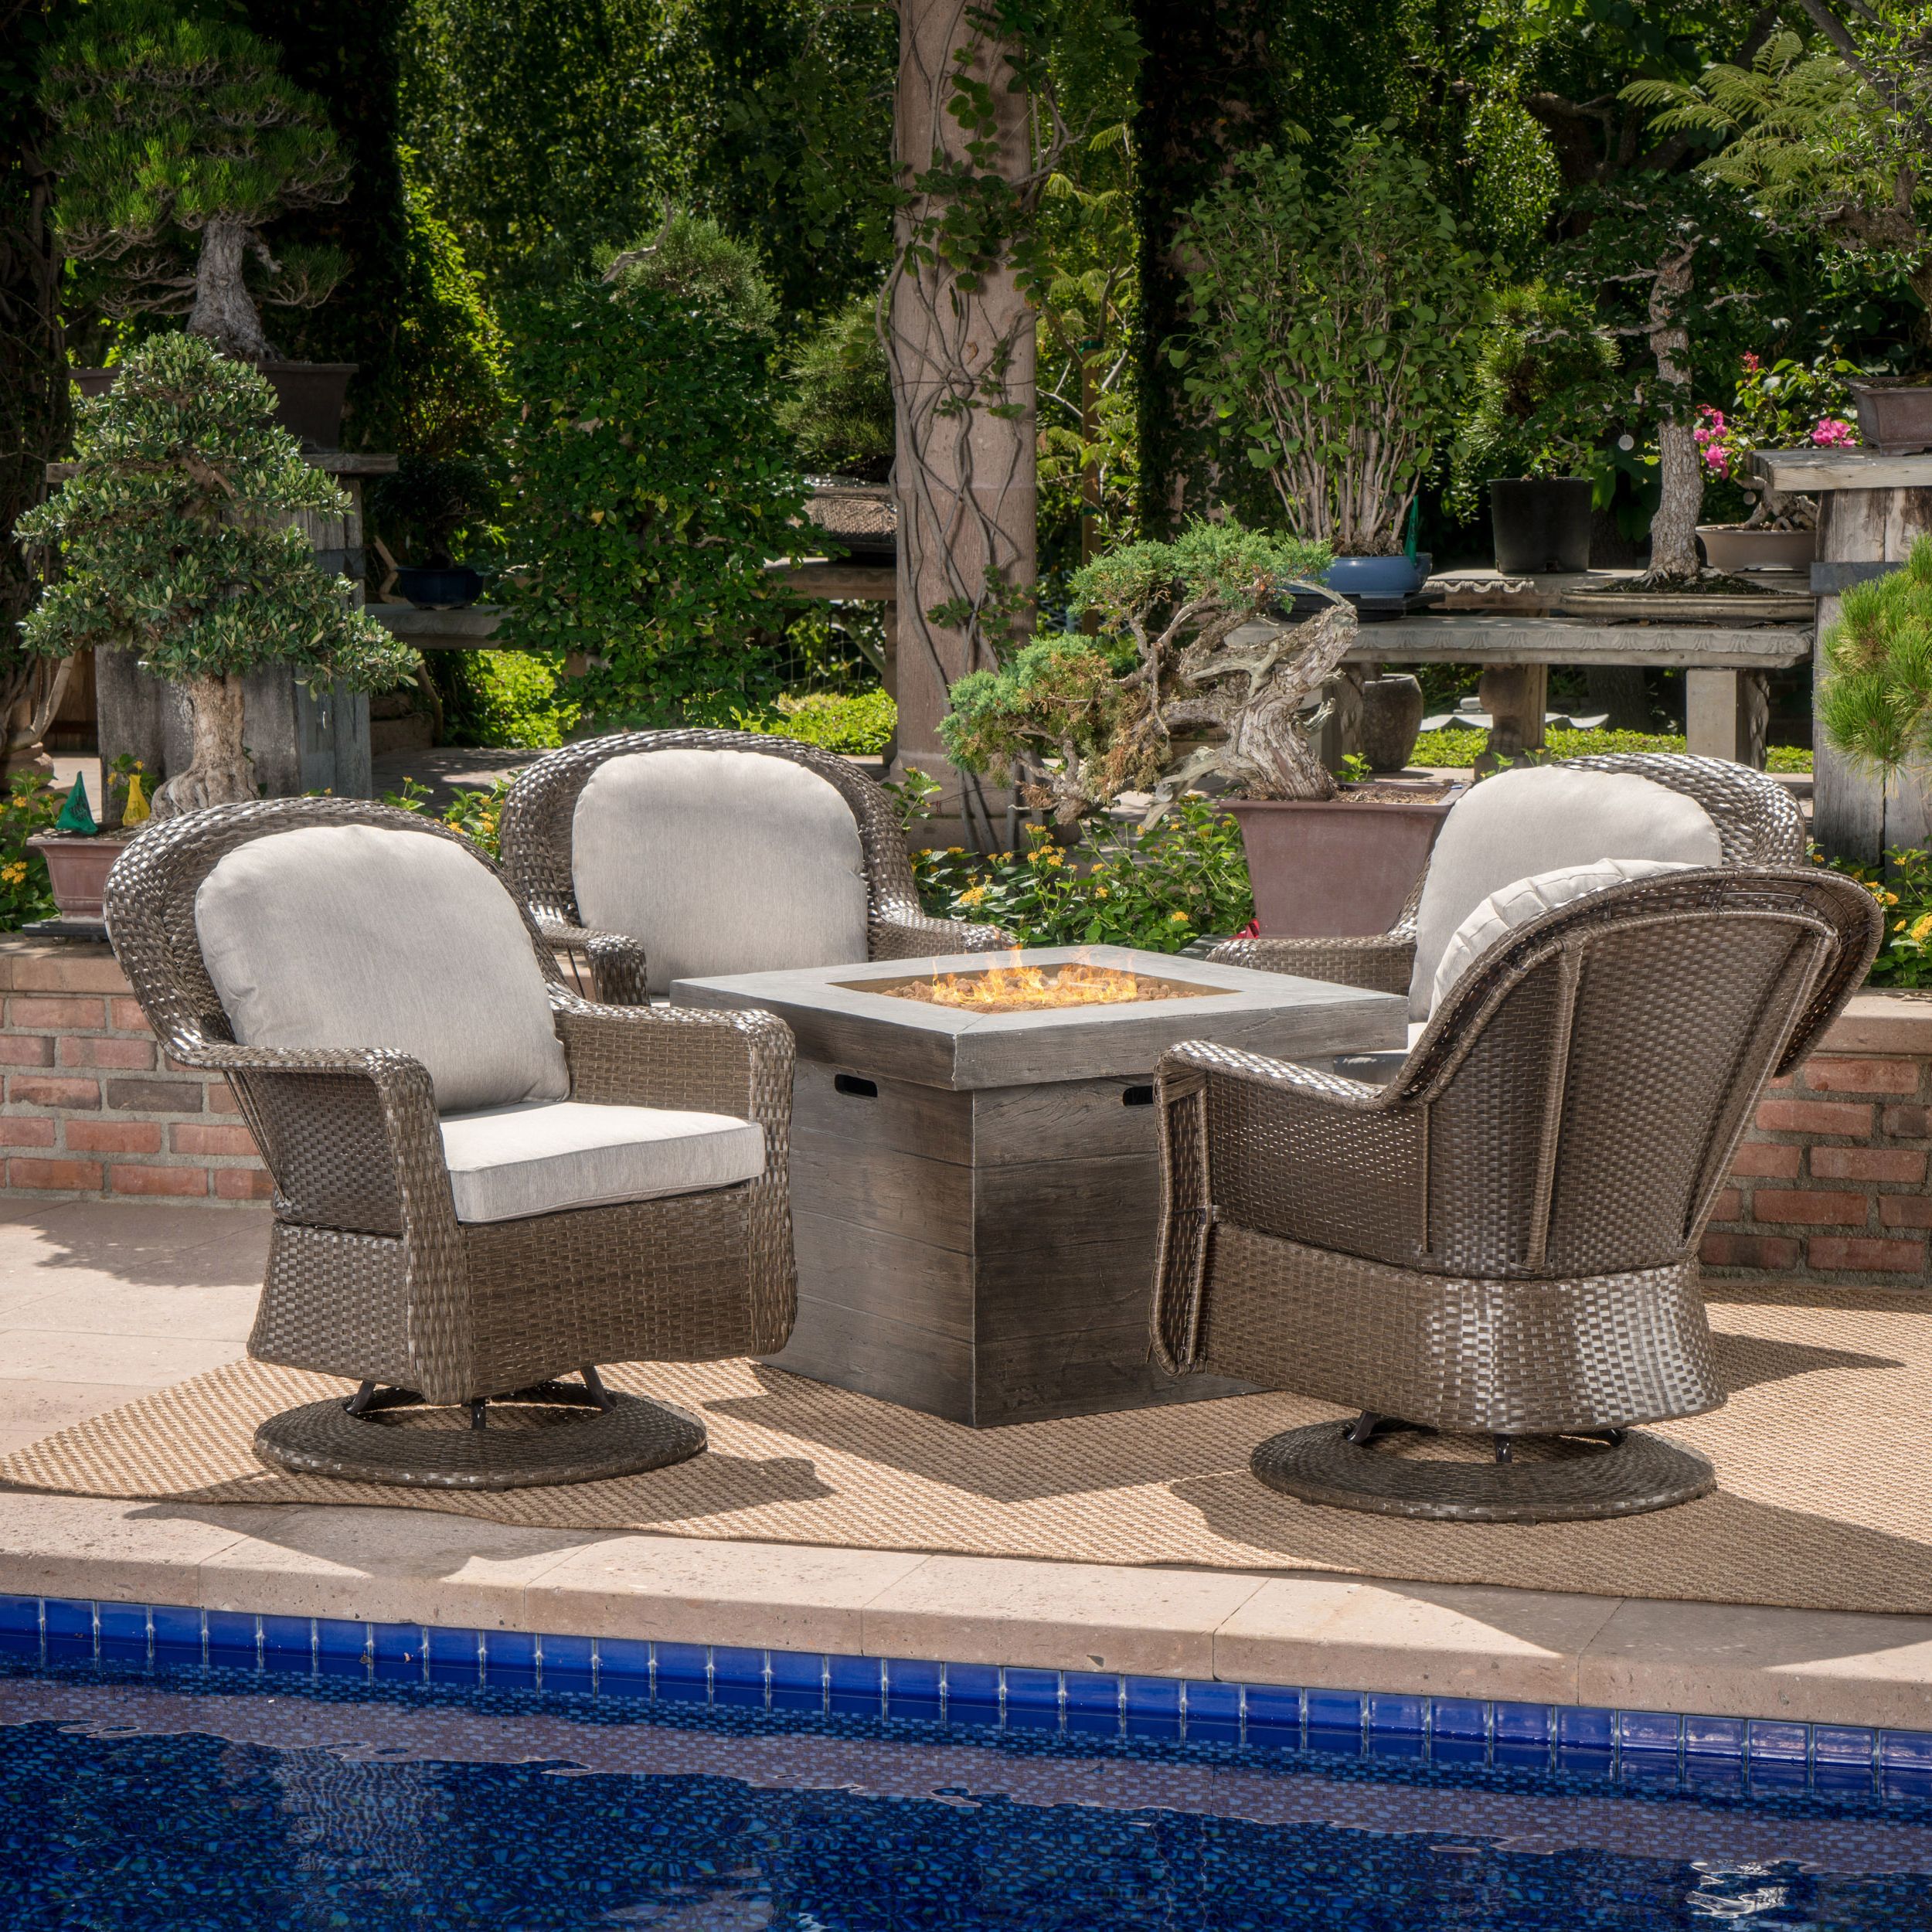 2019 Chloe Outdoor 5 Piece Wicker Swivel Club Chairs And Cushions With Gas Inside Outdoor Wicker Gray Cushion Patio Sets (View 5 of 15)